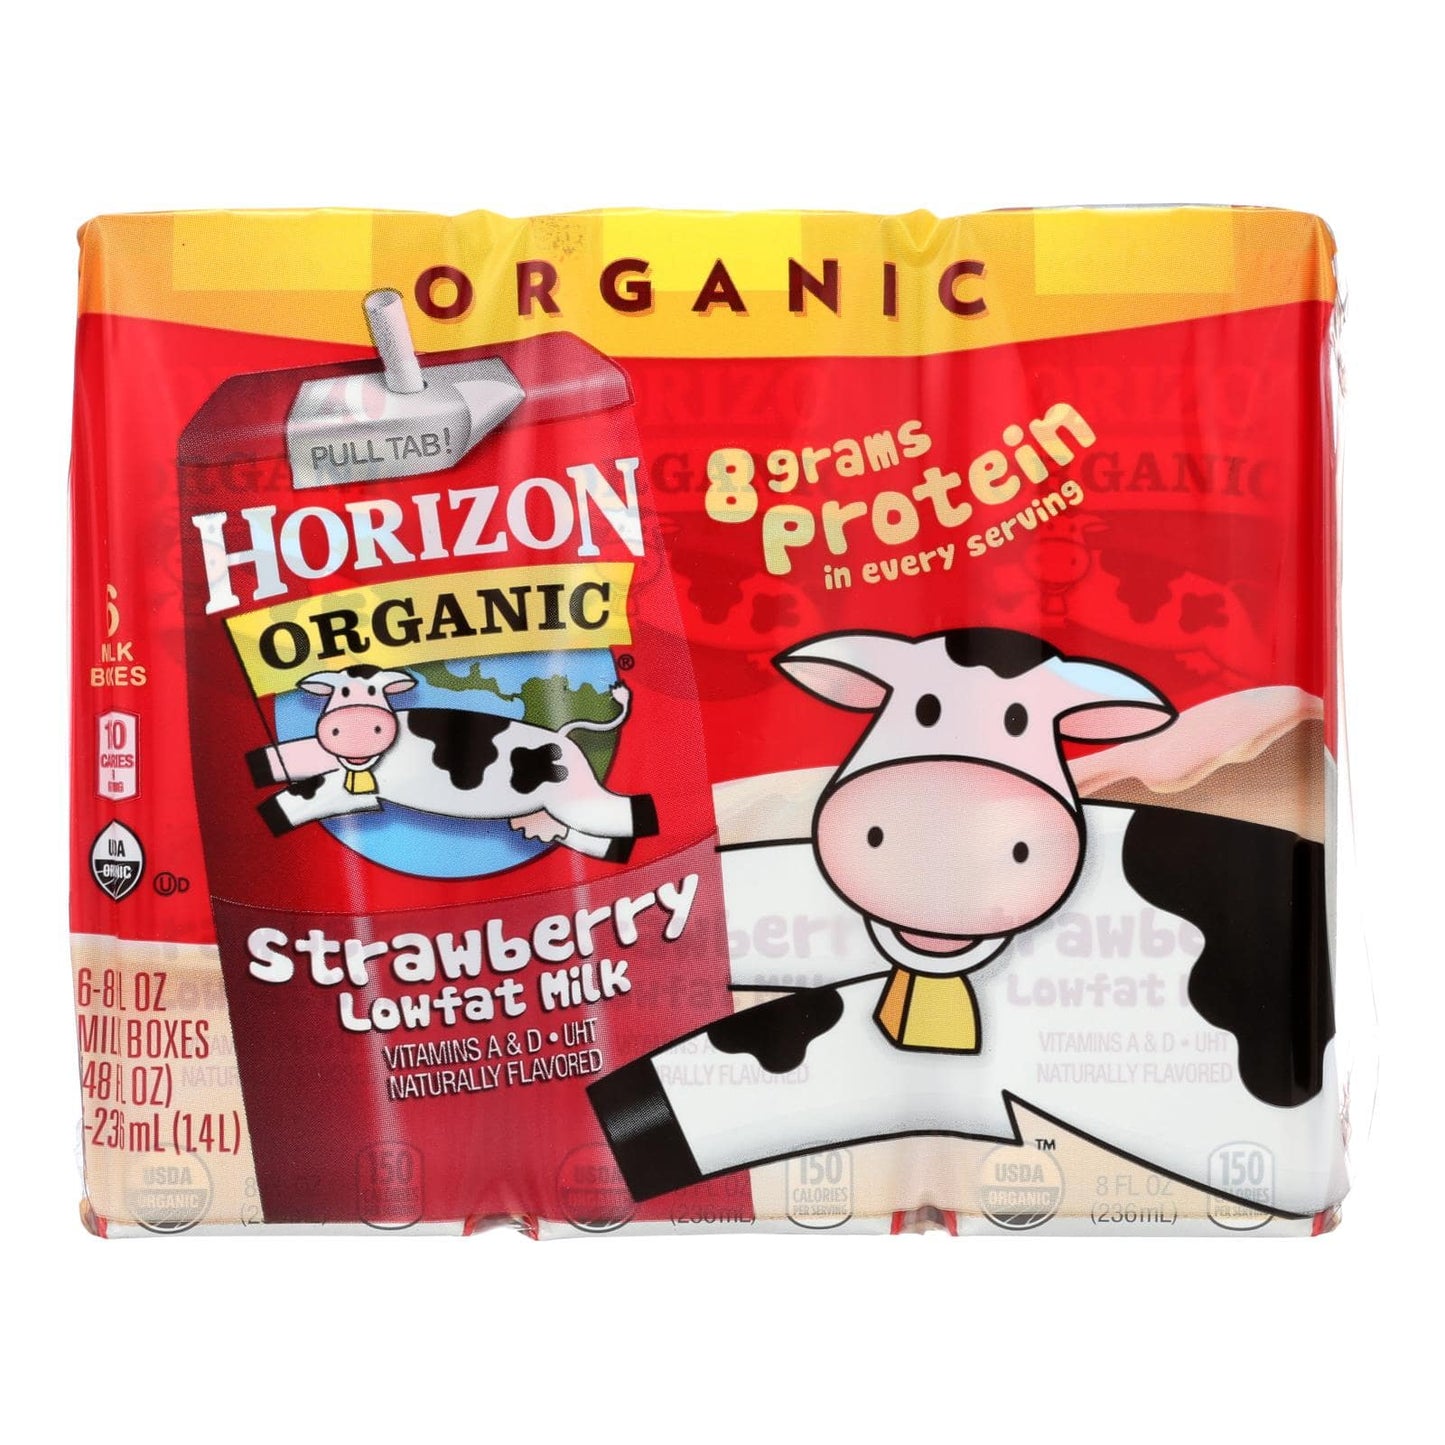 Buy Horizon Organic Dairy Low-fat Milk - Strawberry - Case Of 3 - 8 Fl Oz.  at OnlyNaturals.us